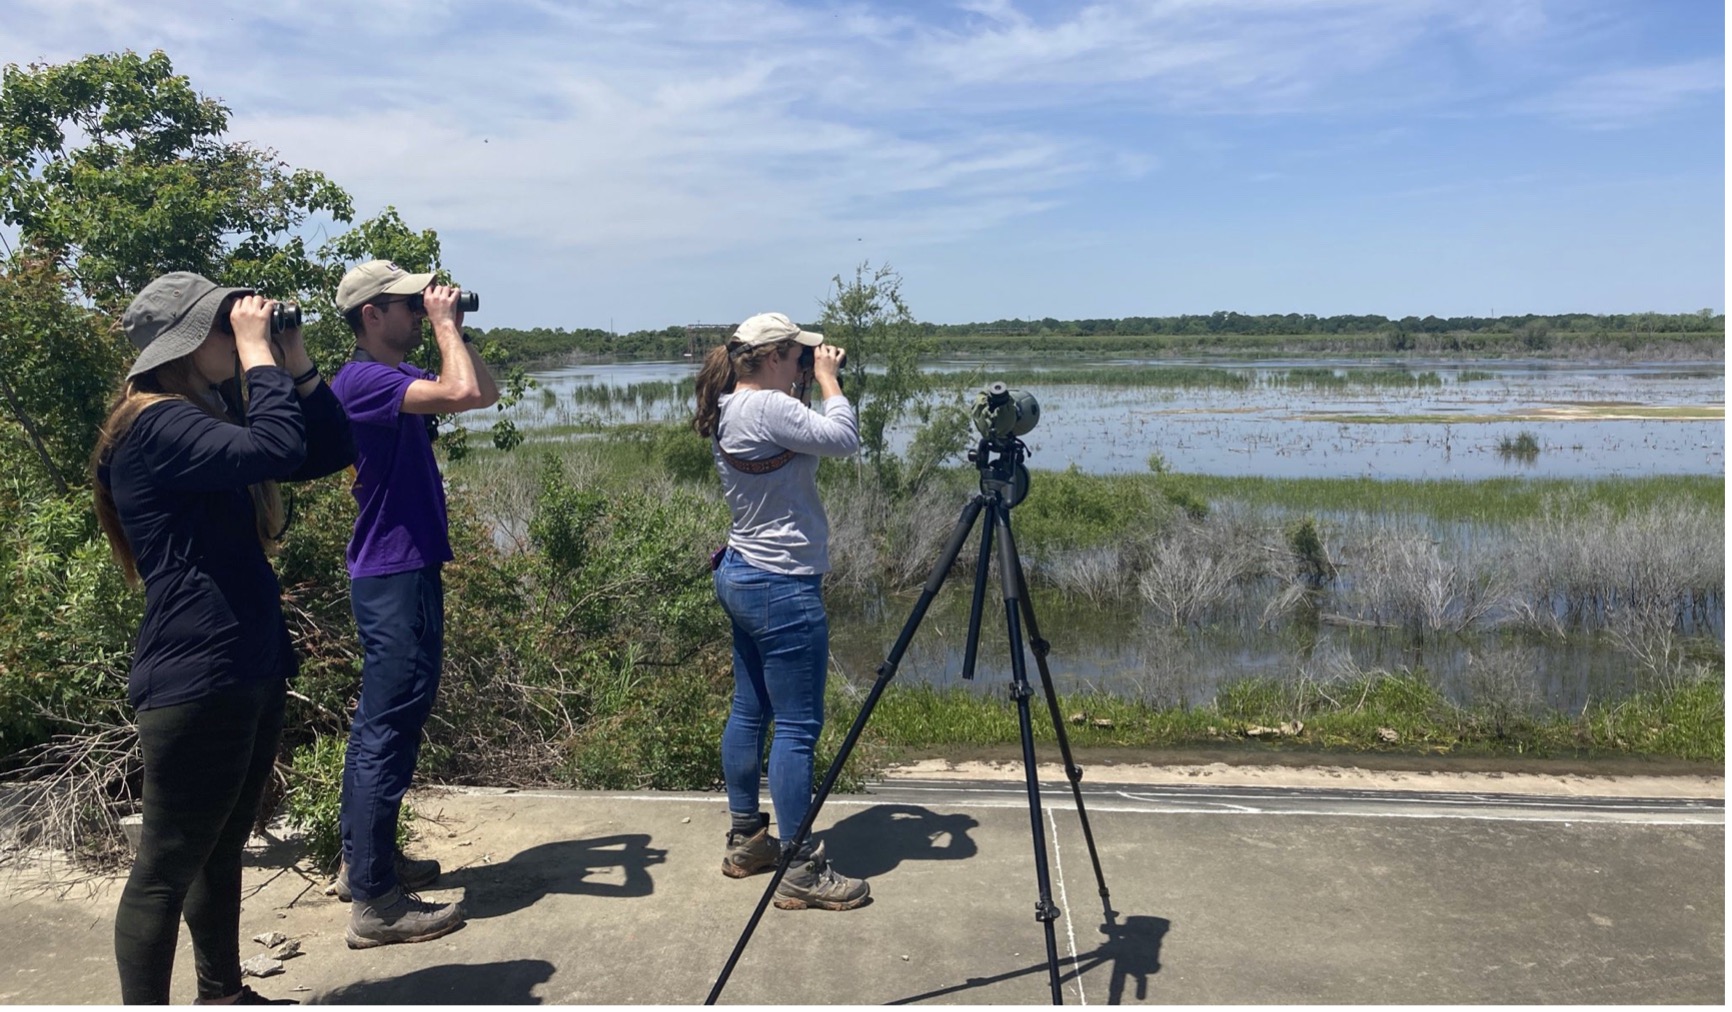 Three naturalists capturing photographs in the field